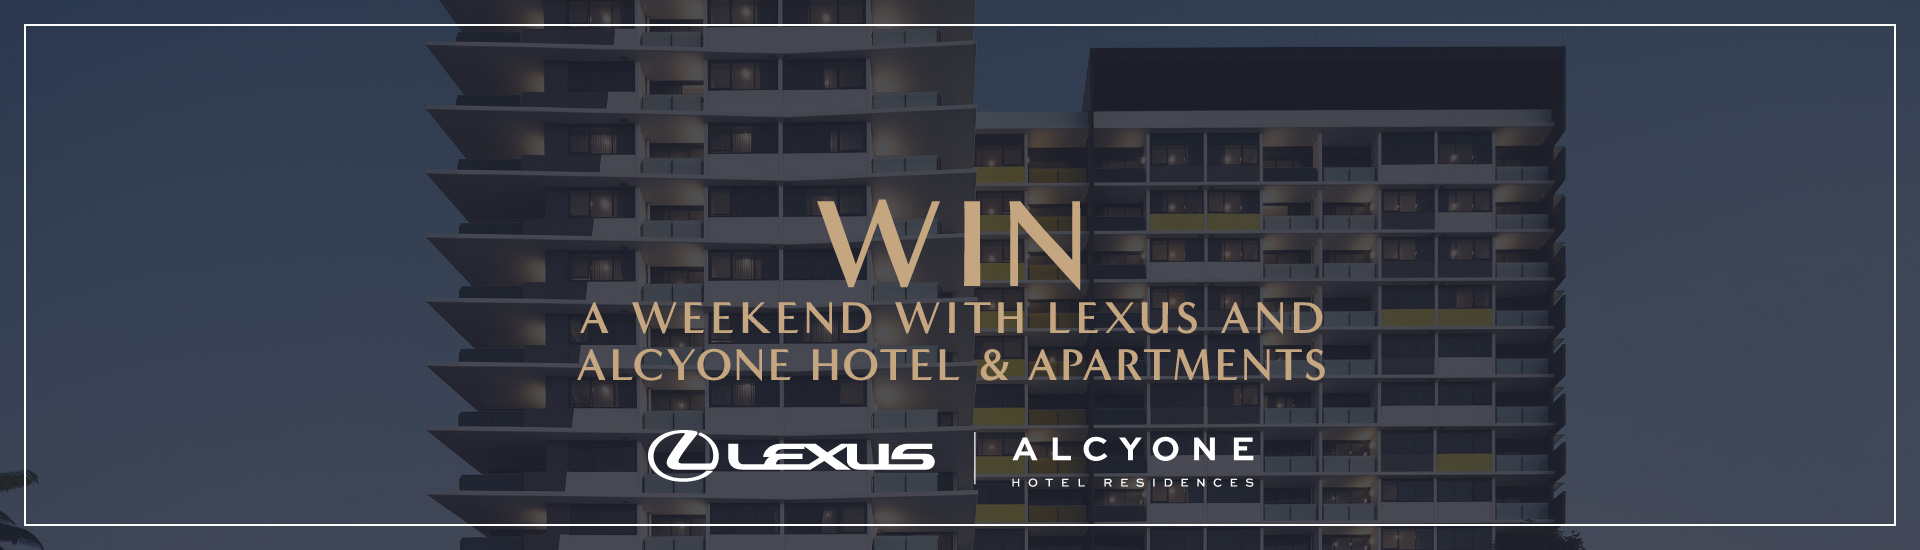 WIN a Weekend with Lexus and Alcyone Hotel Residences | Brisbane Racing Club 